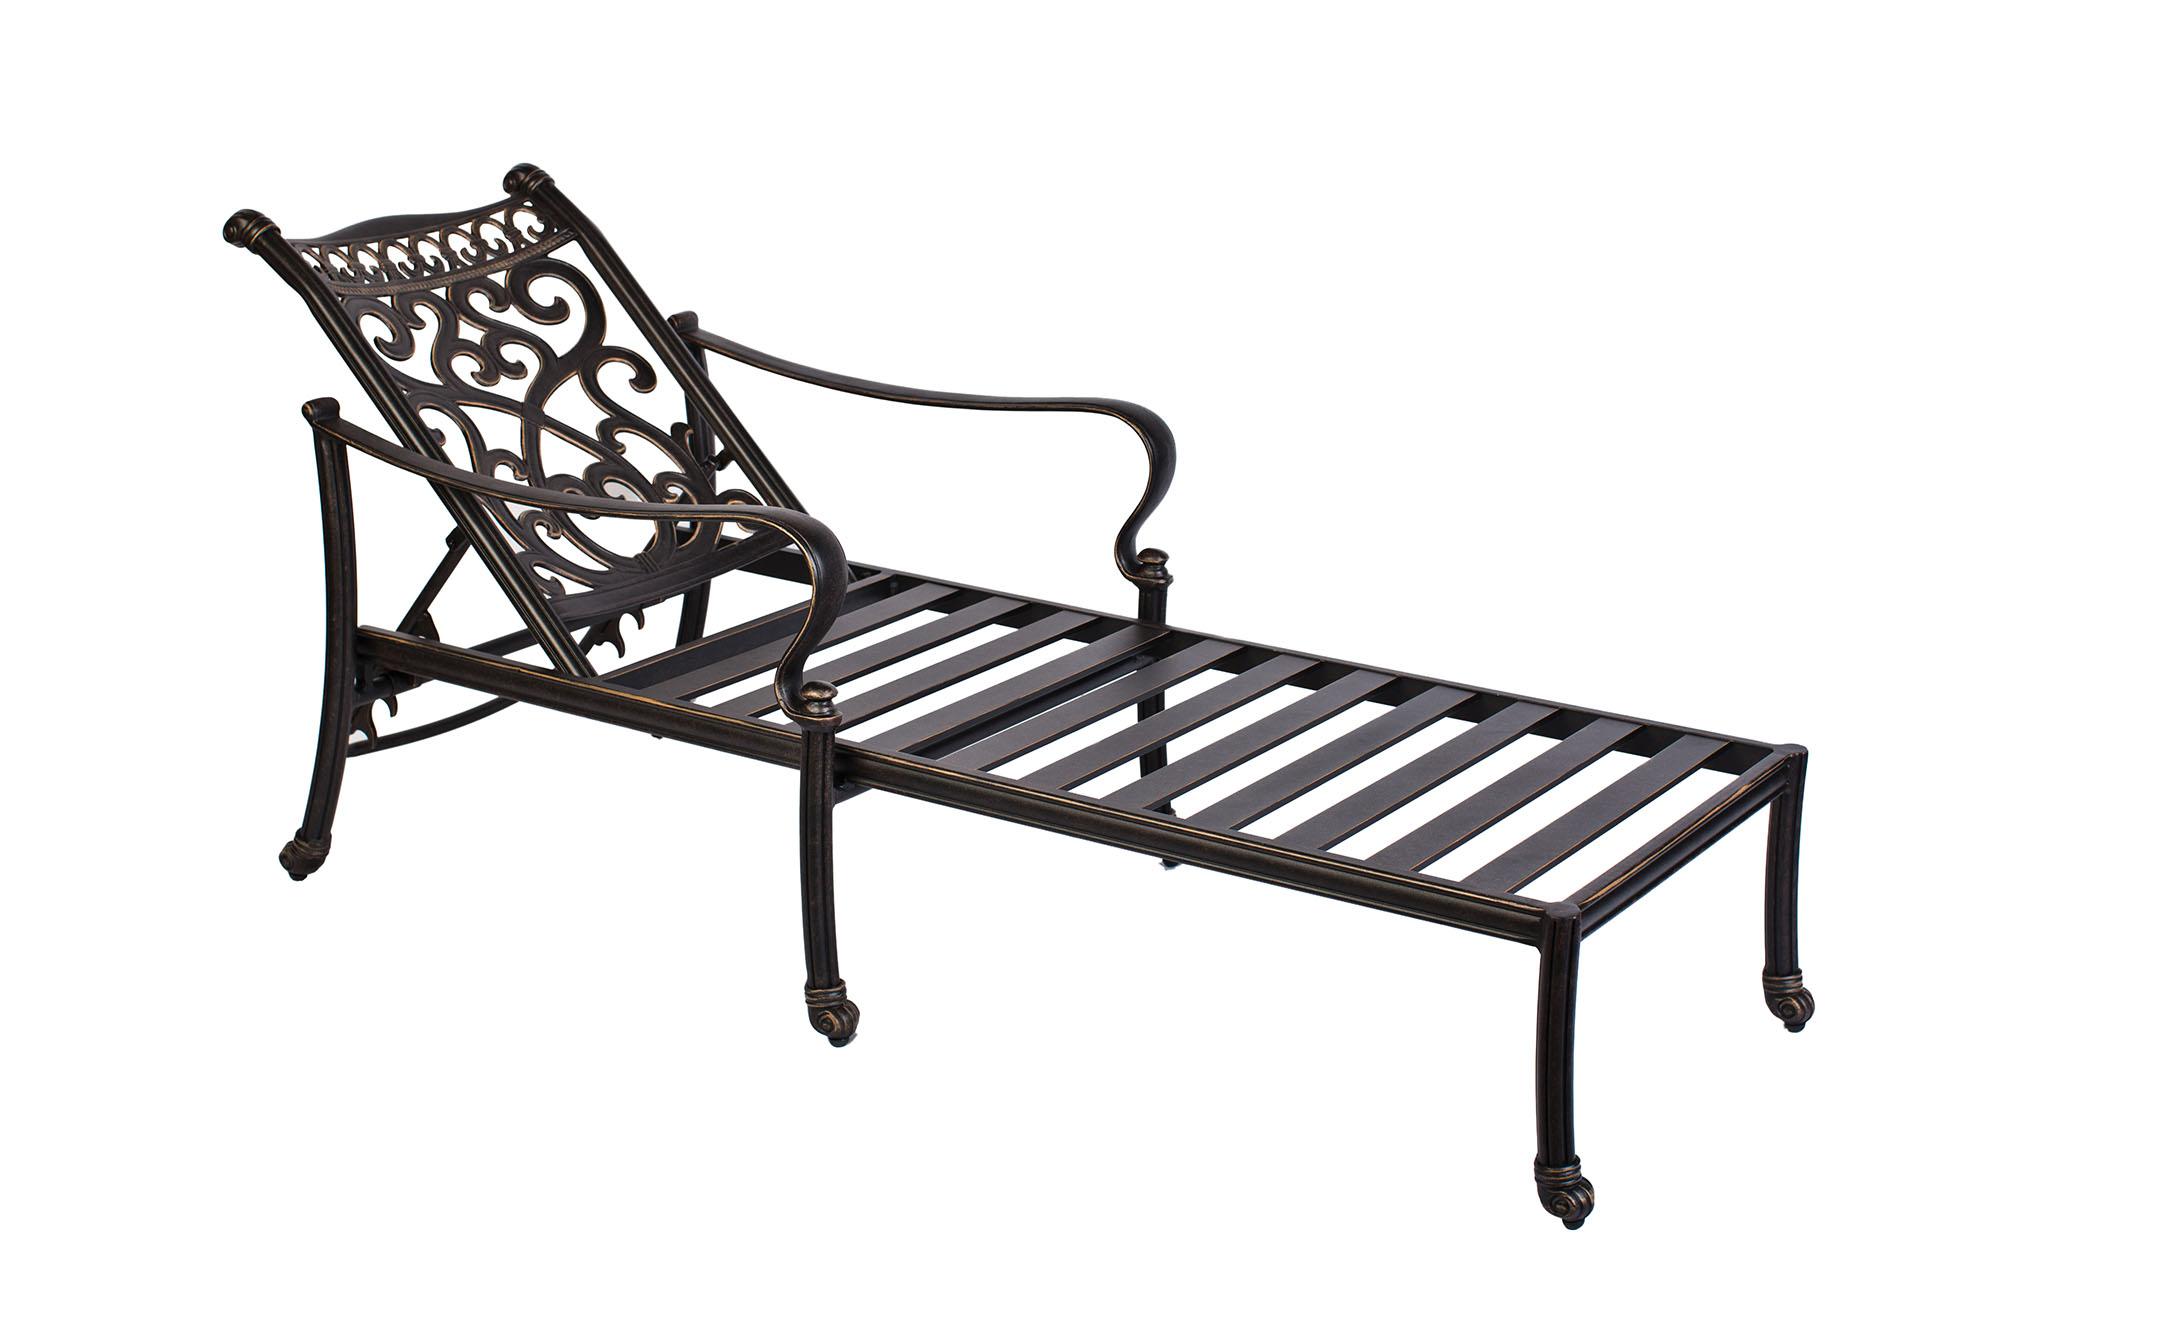 

    
Alexis Cast Aluminum Chaise Lounger w/ Natural Sunbrella Cushion Set of 2 by CaliPatio SPECIAL ORDER
